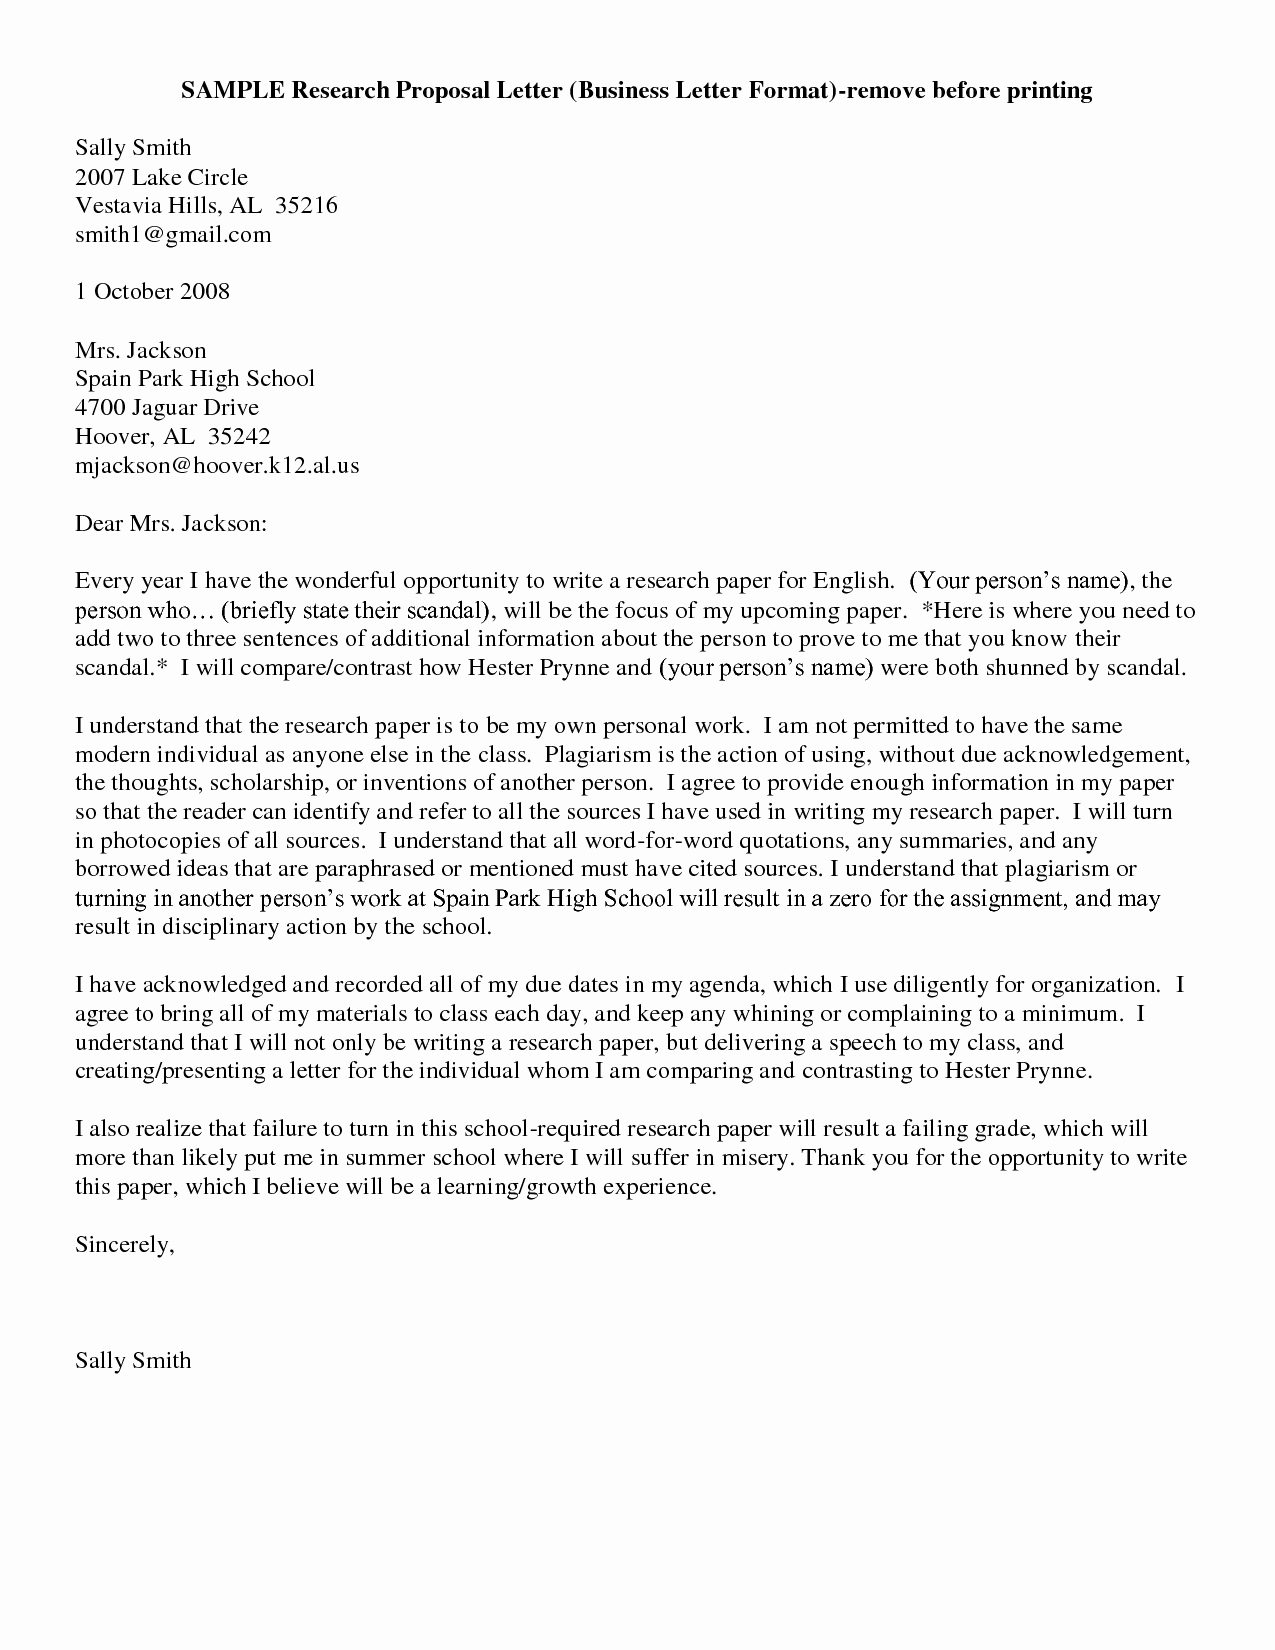 Sample Of Buisness Letter Beautiful Business Letter format – Download Samples Of Business